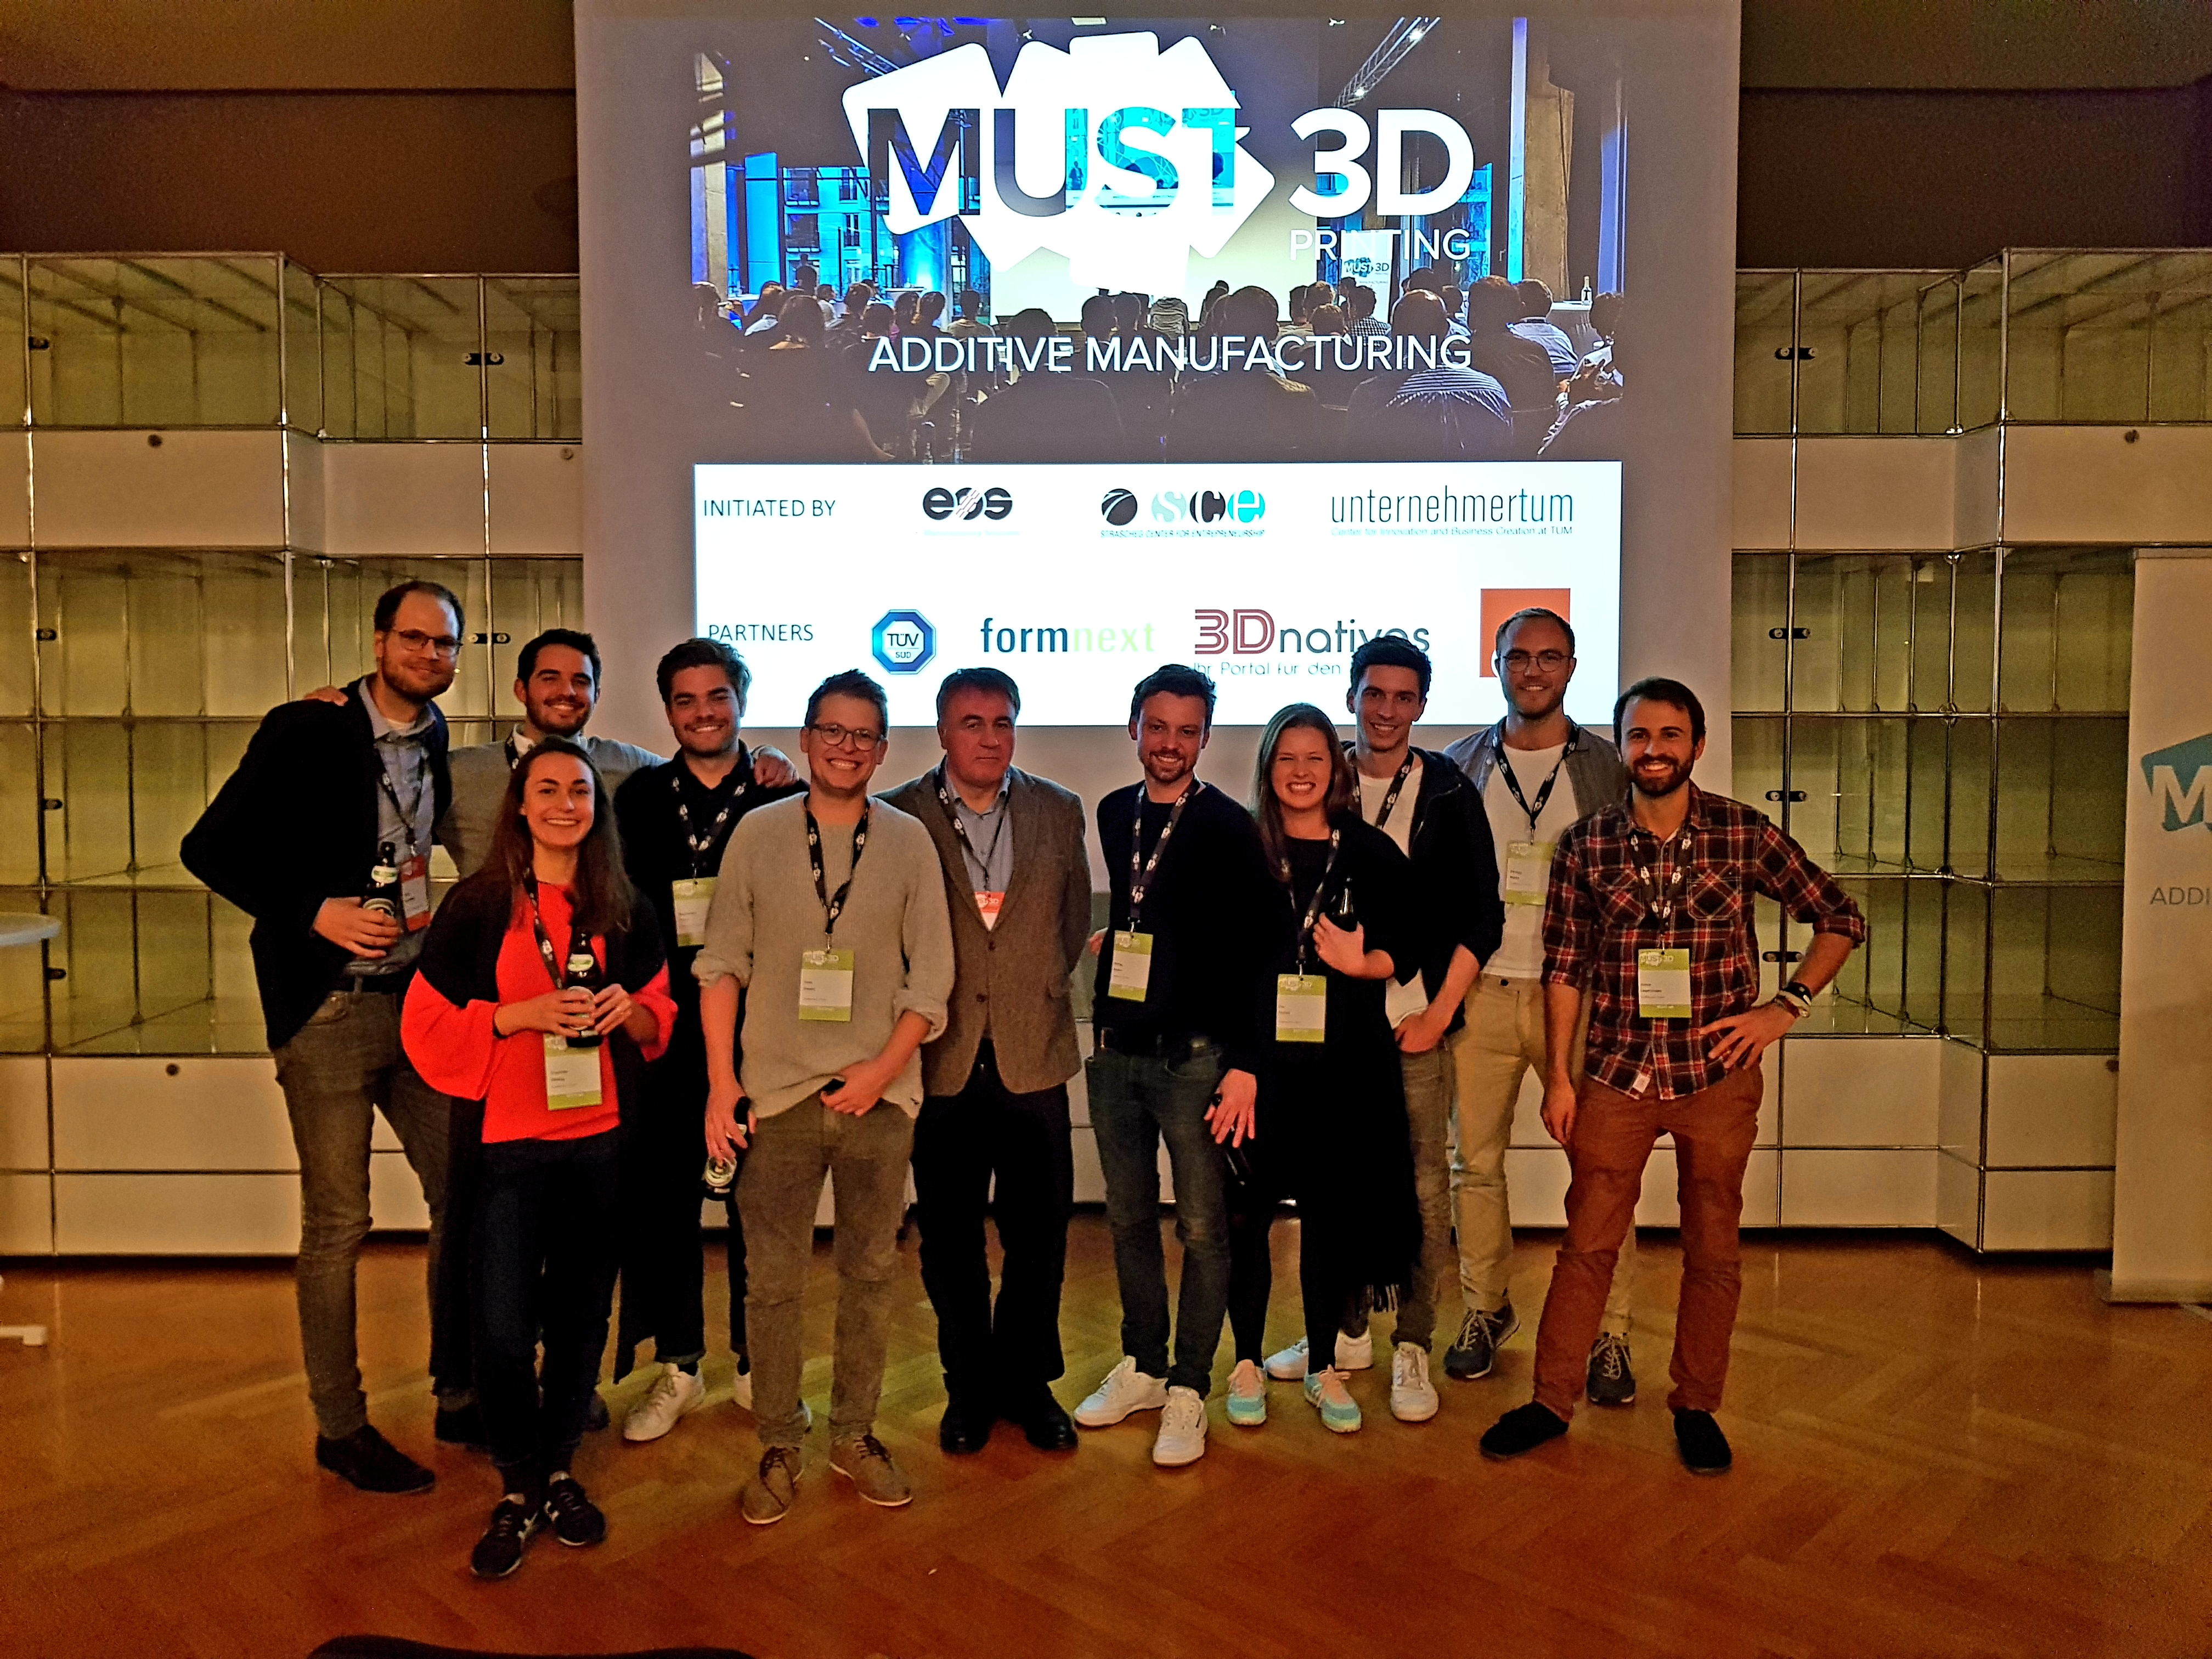 AM Ventures and Dyemansion at Must 3D Printing 2018 in Munich. Photo by Oscar Milani Gallieni